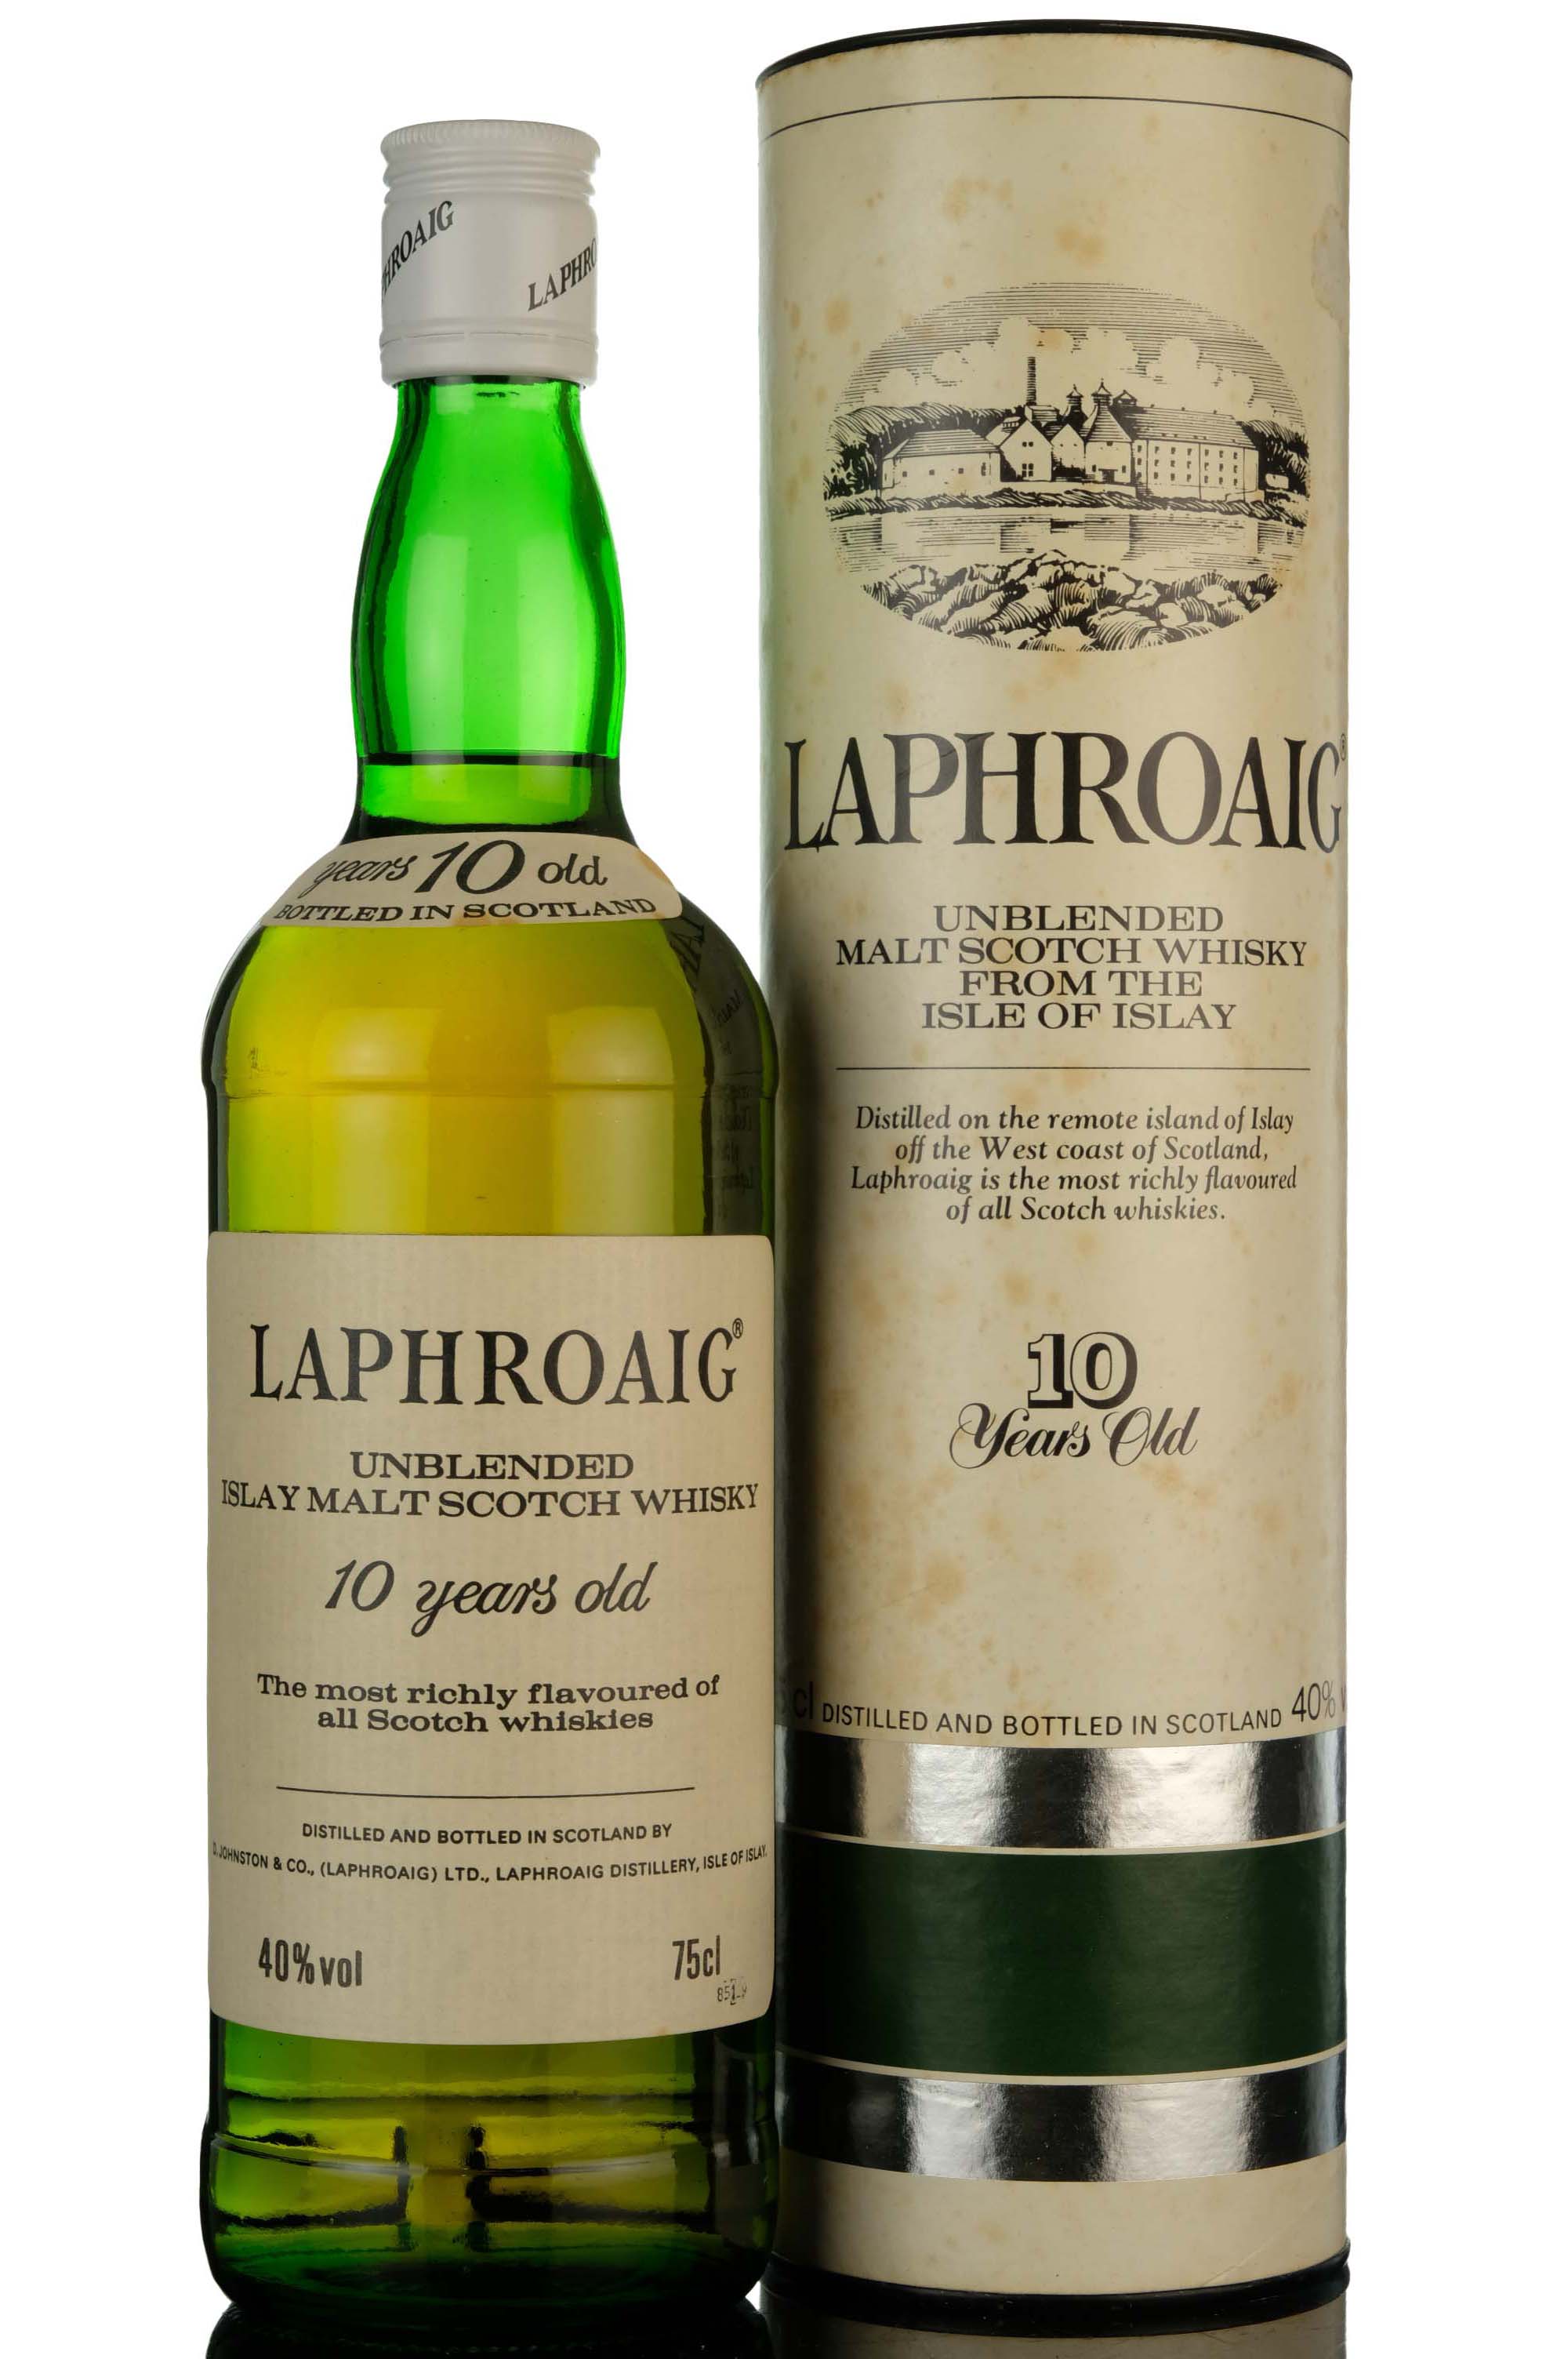 Laphroaig 10 Year Old - Unblended - 1985 Release